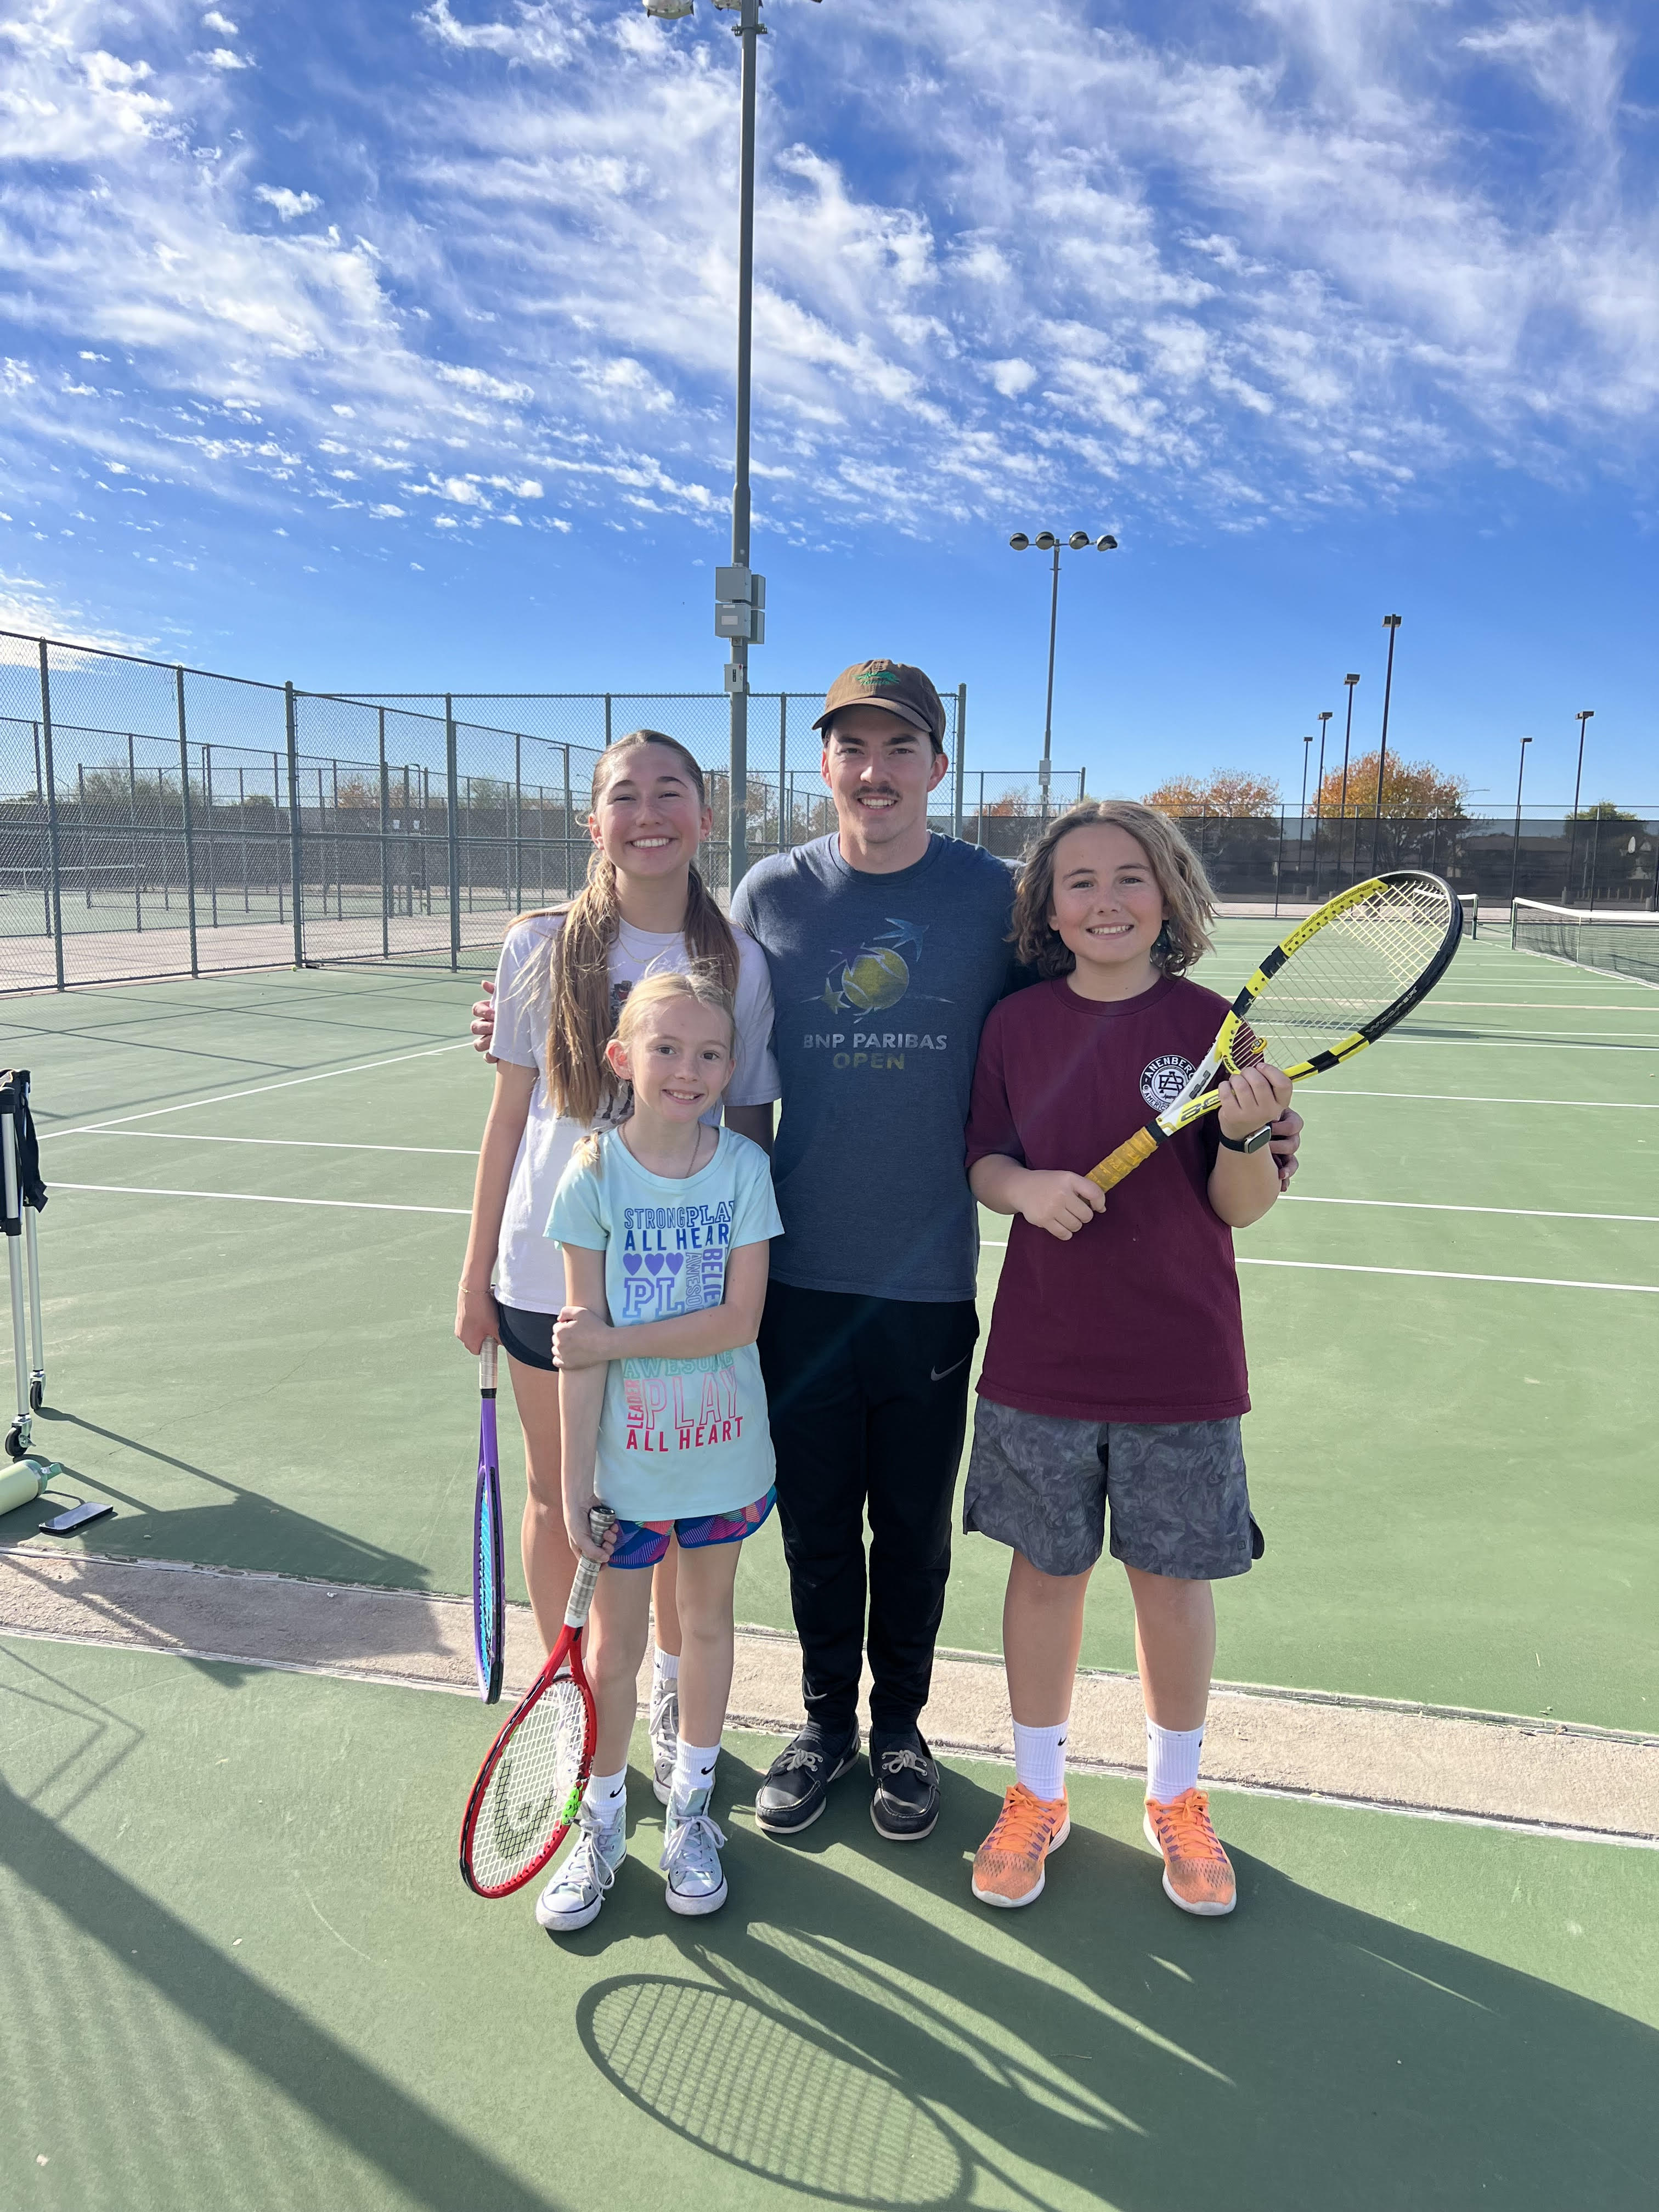 Ethan G. teaches tennis lessons in Provo, UT